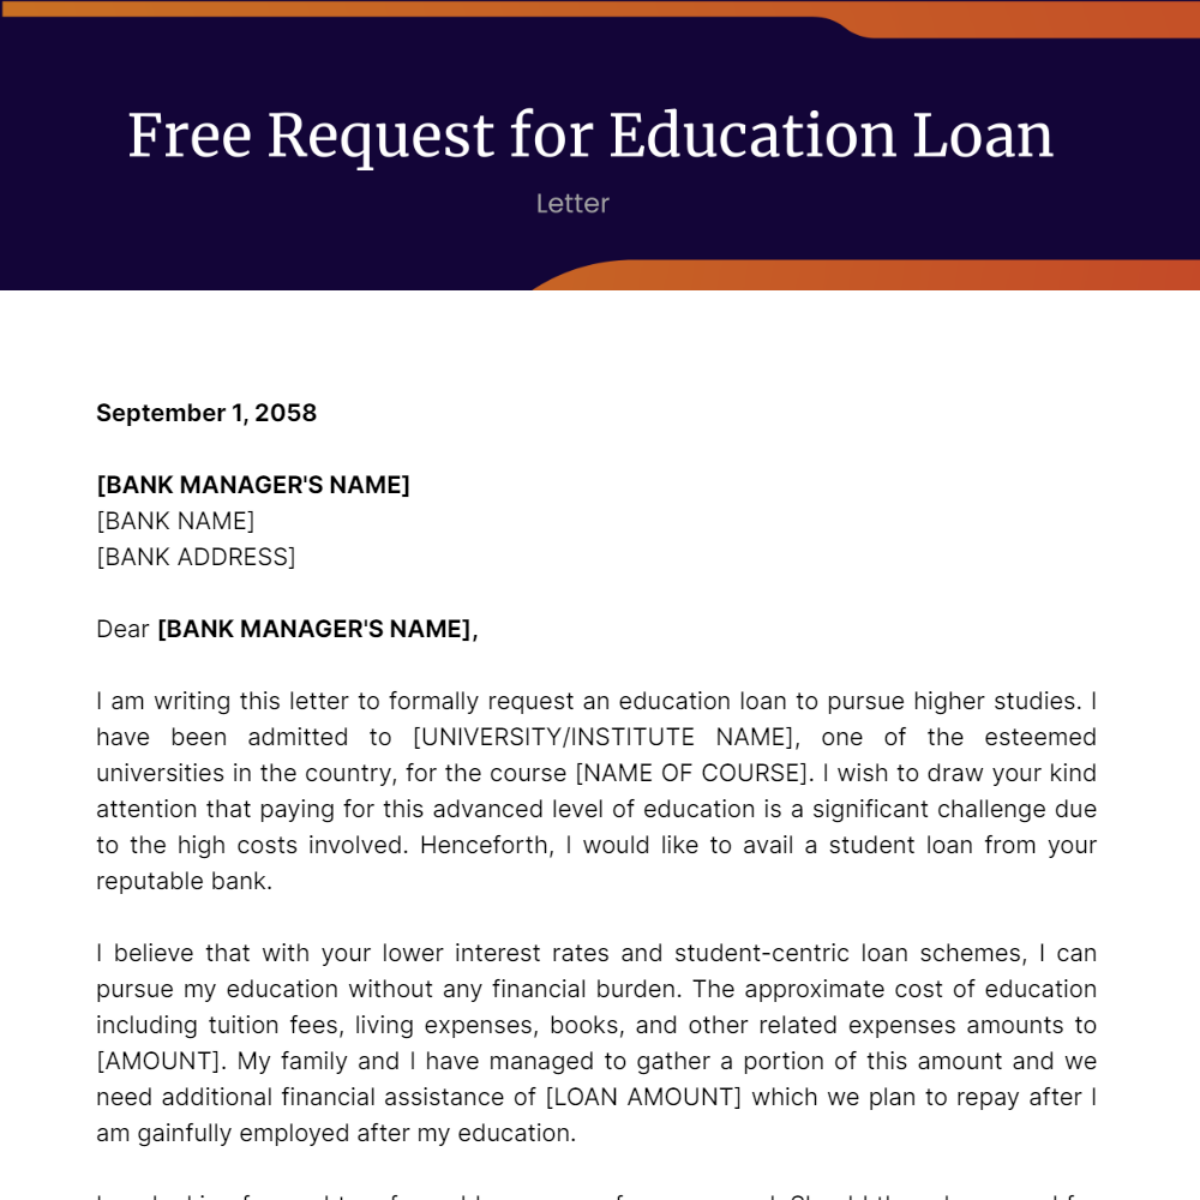 Request for Education Loan Letter Template